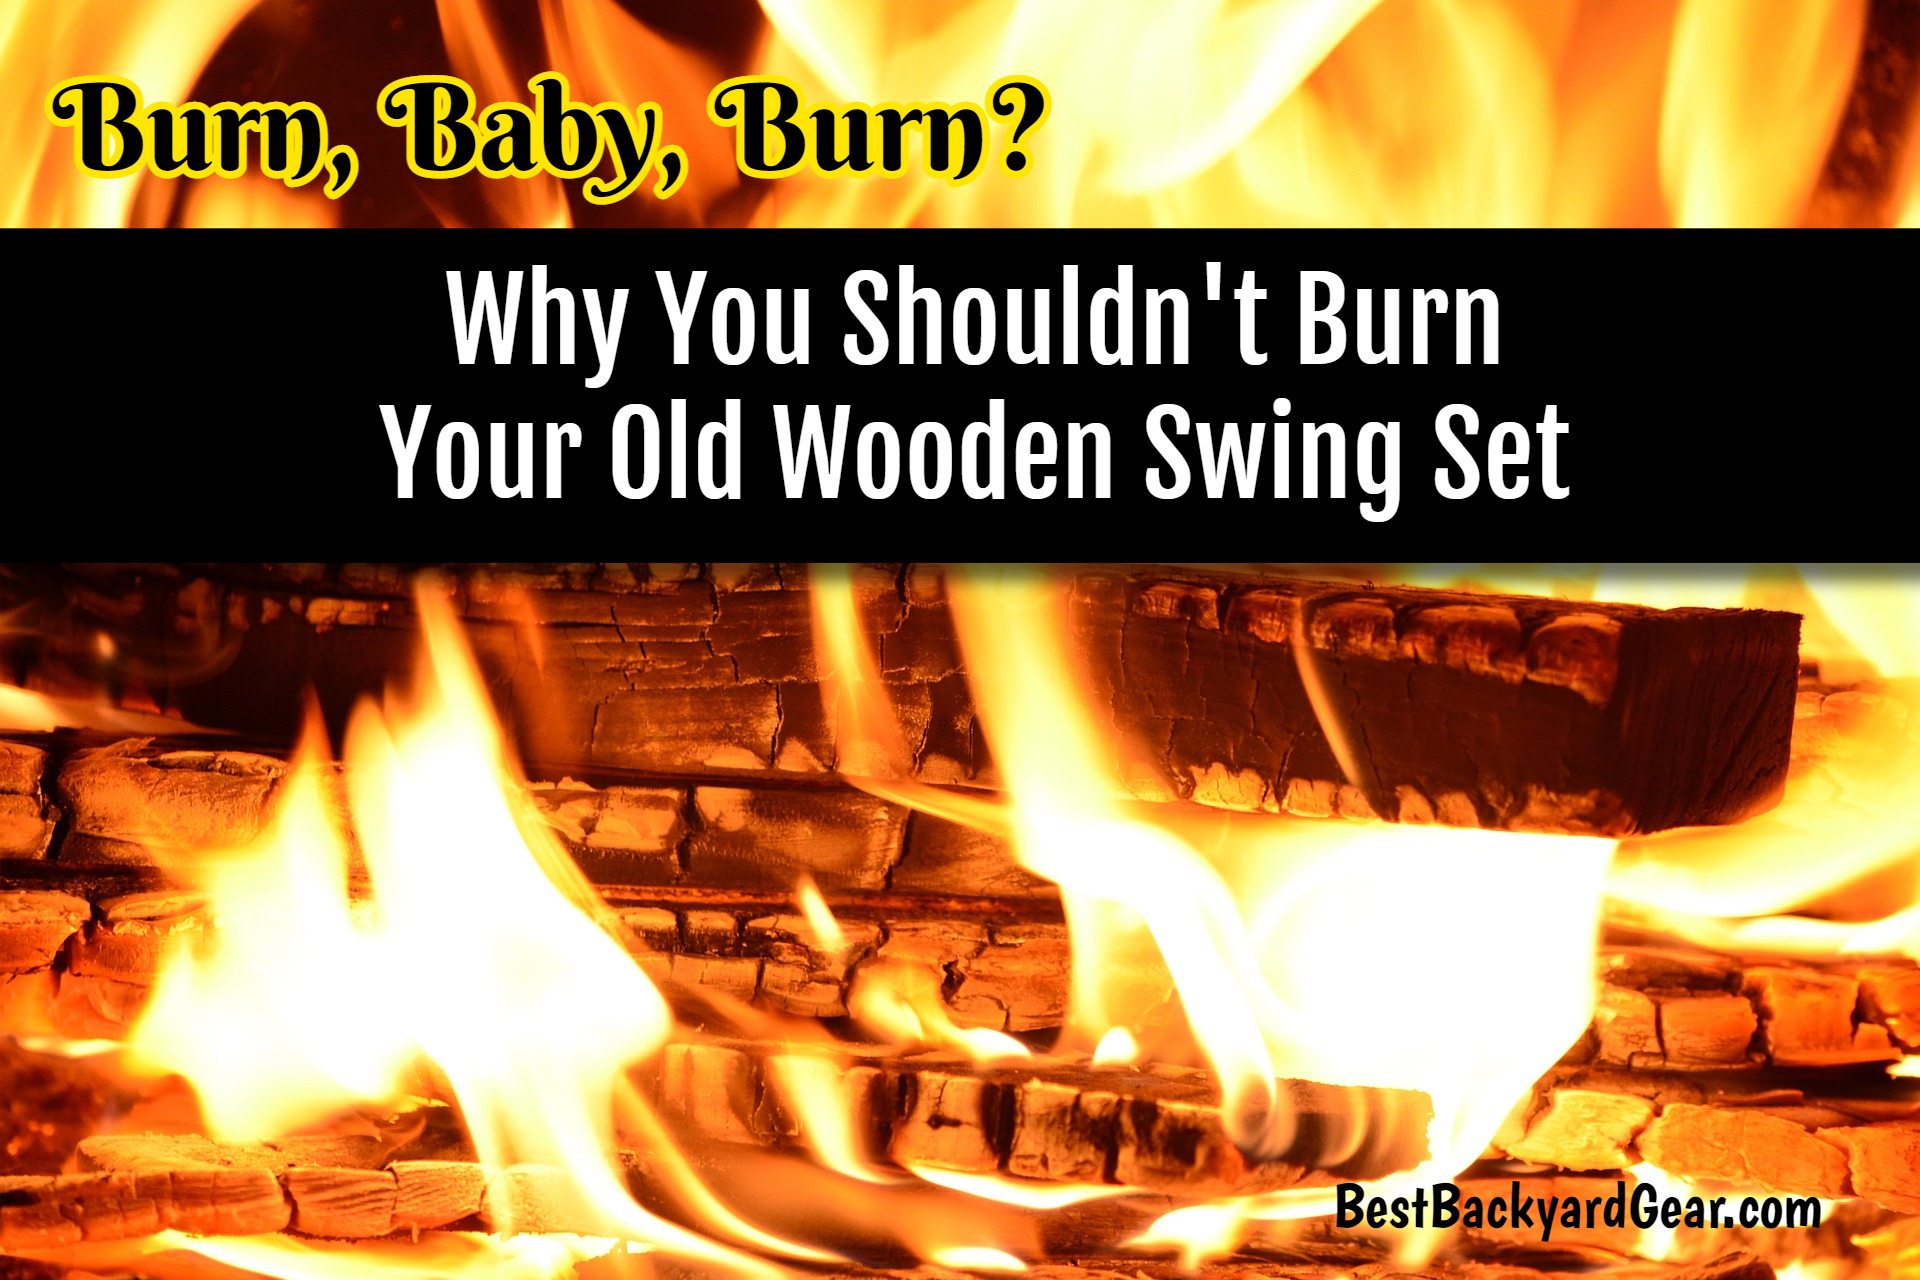 can you burn your old wooden swing set? NO!